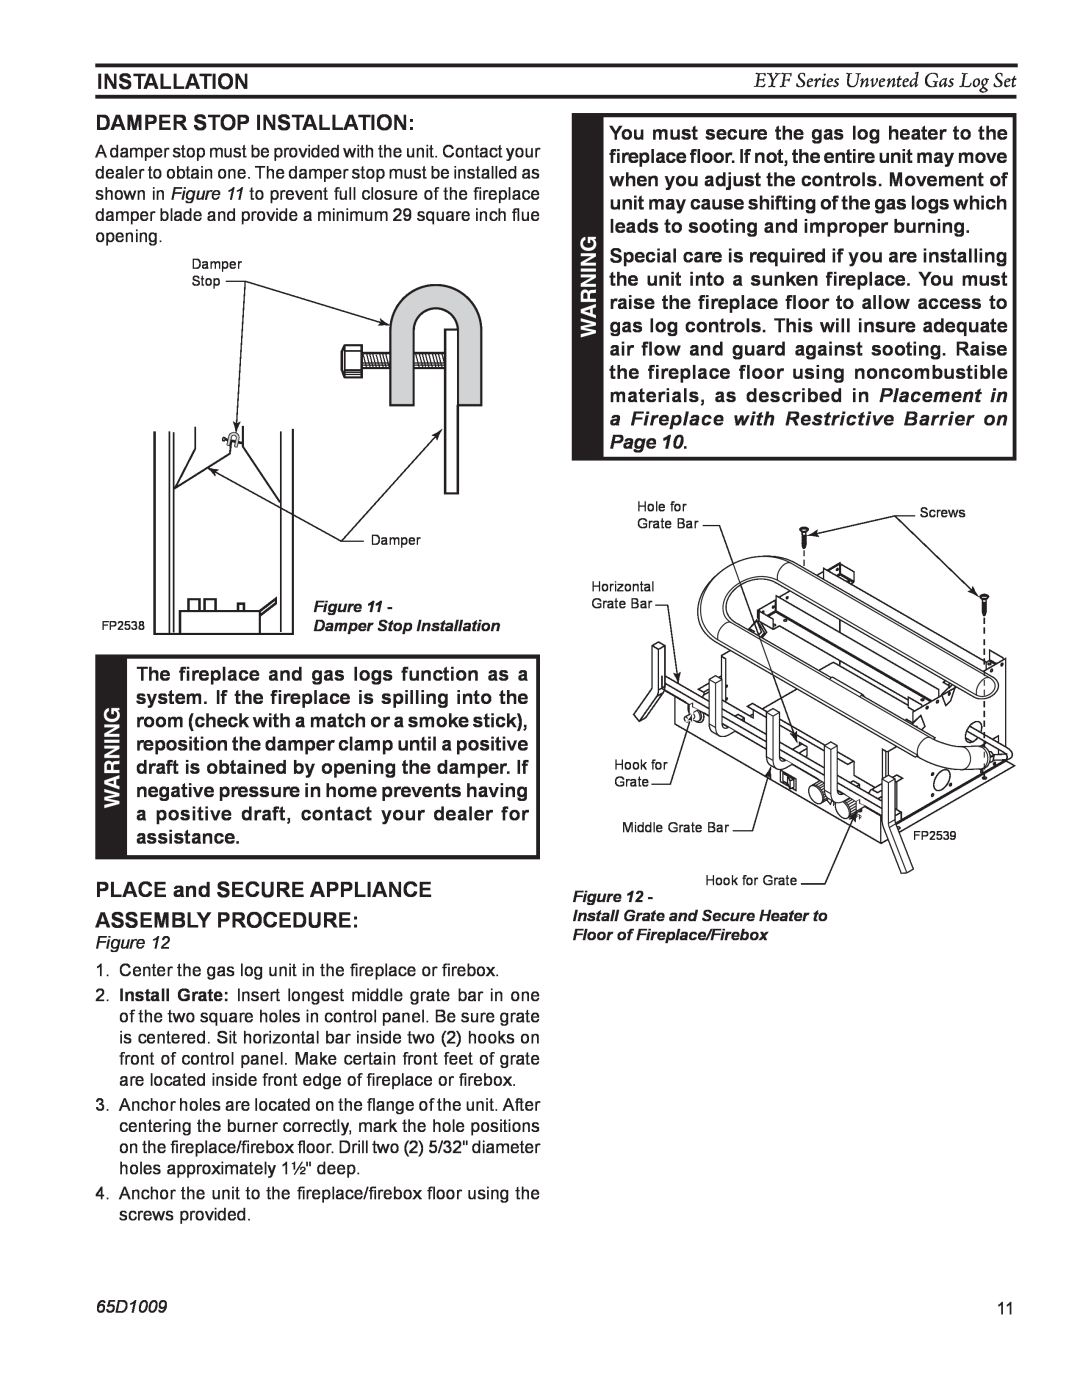 Monessen Hearth EYF18, EYF24 INSTALLATION Damper stop installation, PLACE and SECURE APPLIANCE, Assembly procedure, Page 